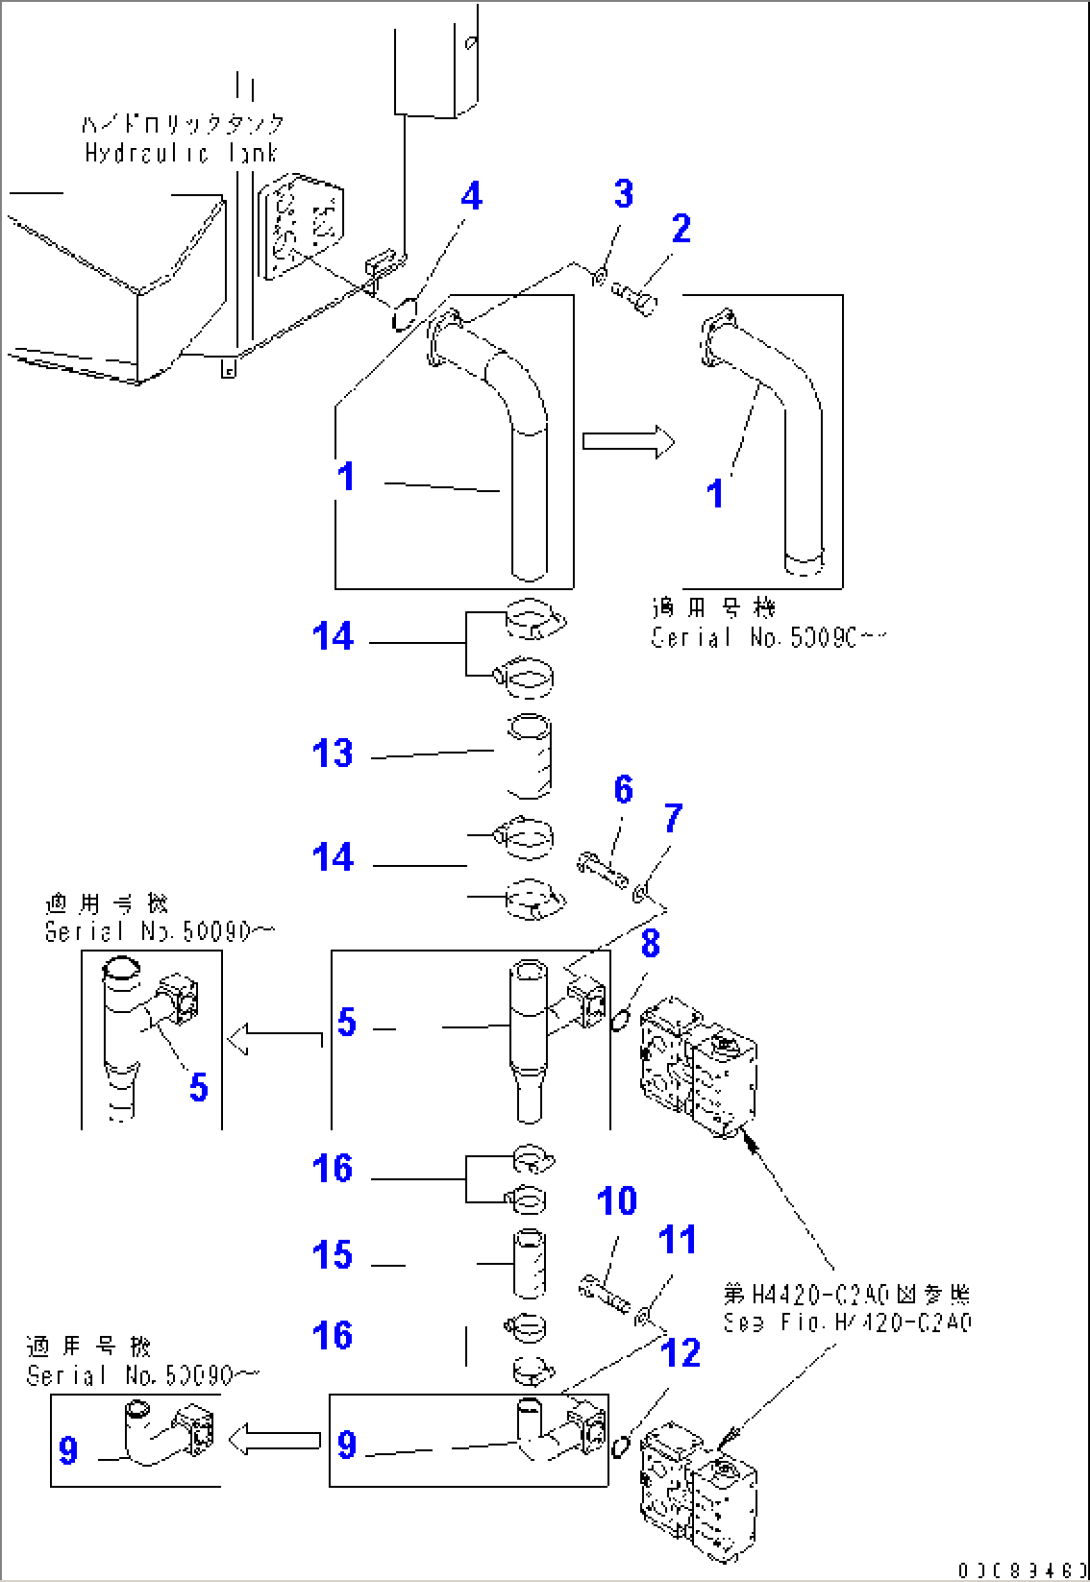 EMERGENCY STEERING LINE (SUCTION PIPING)